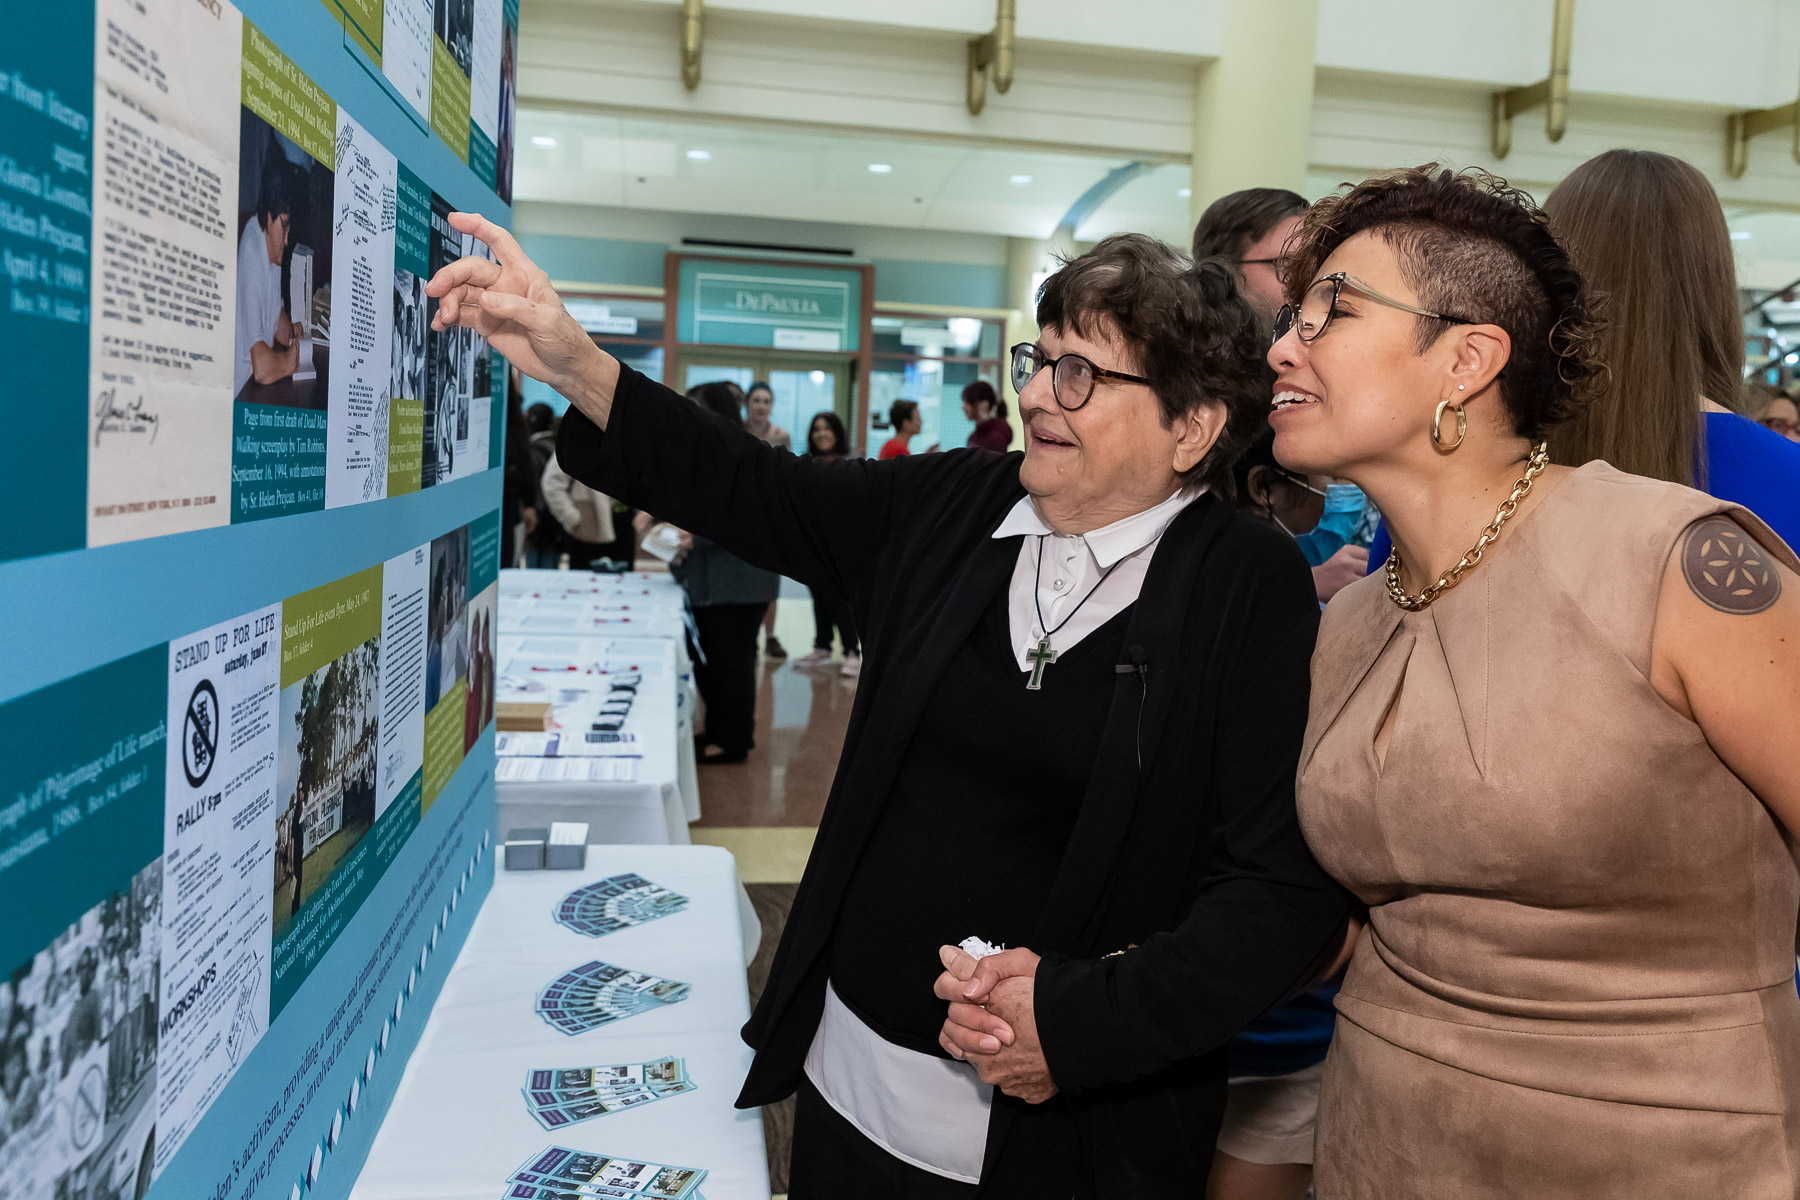 Sister Helen Prejean, C.S.J., points to a display, accompanied by Georgianna Torres Reyes.